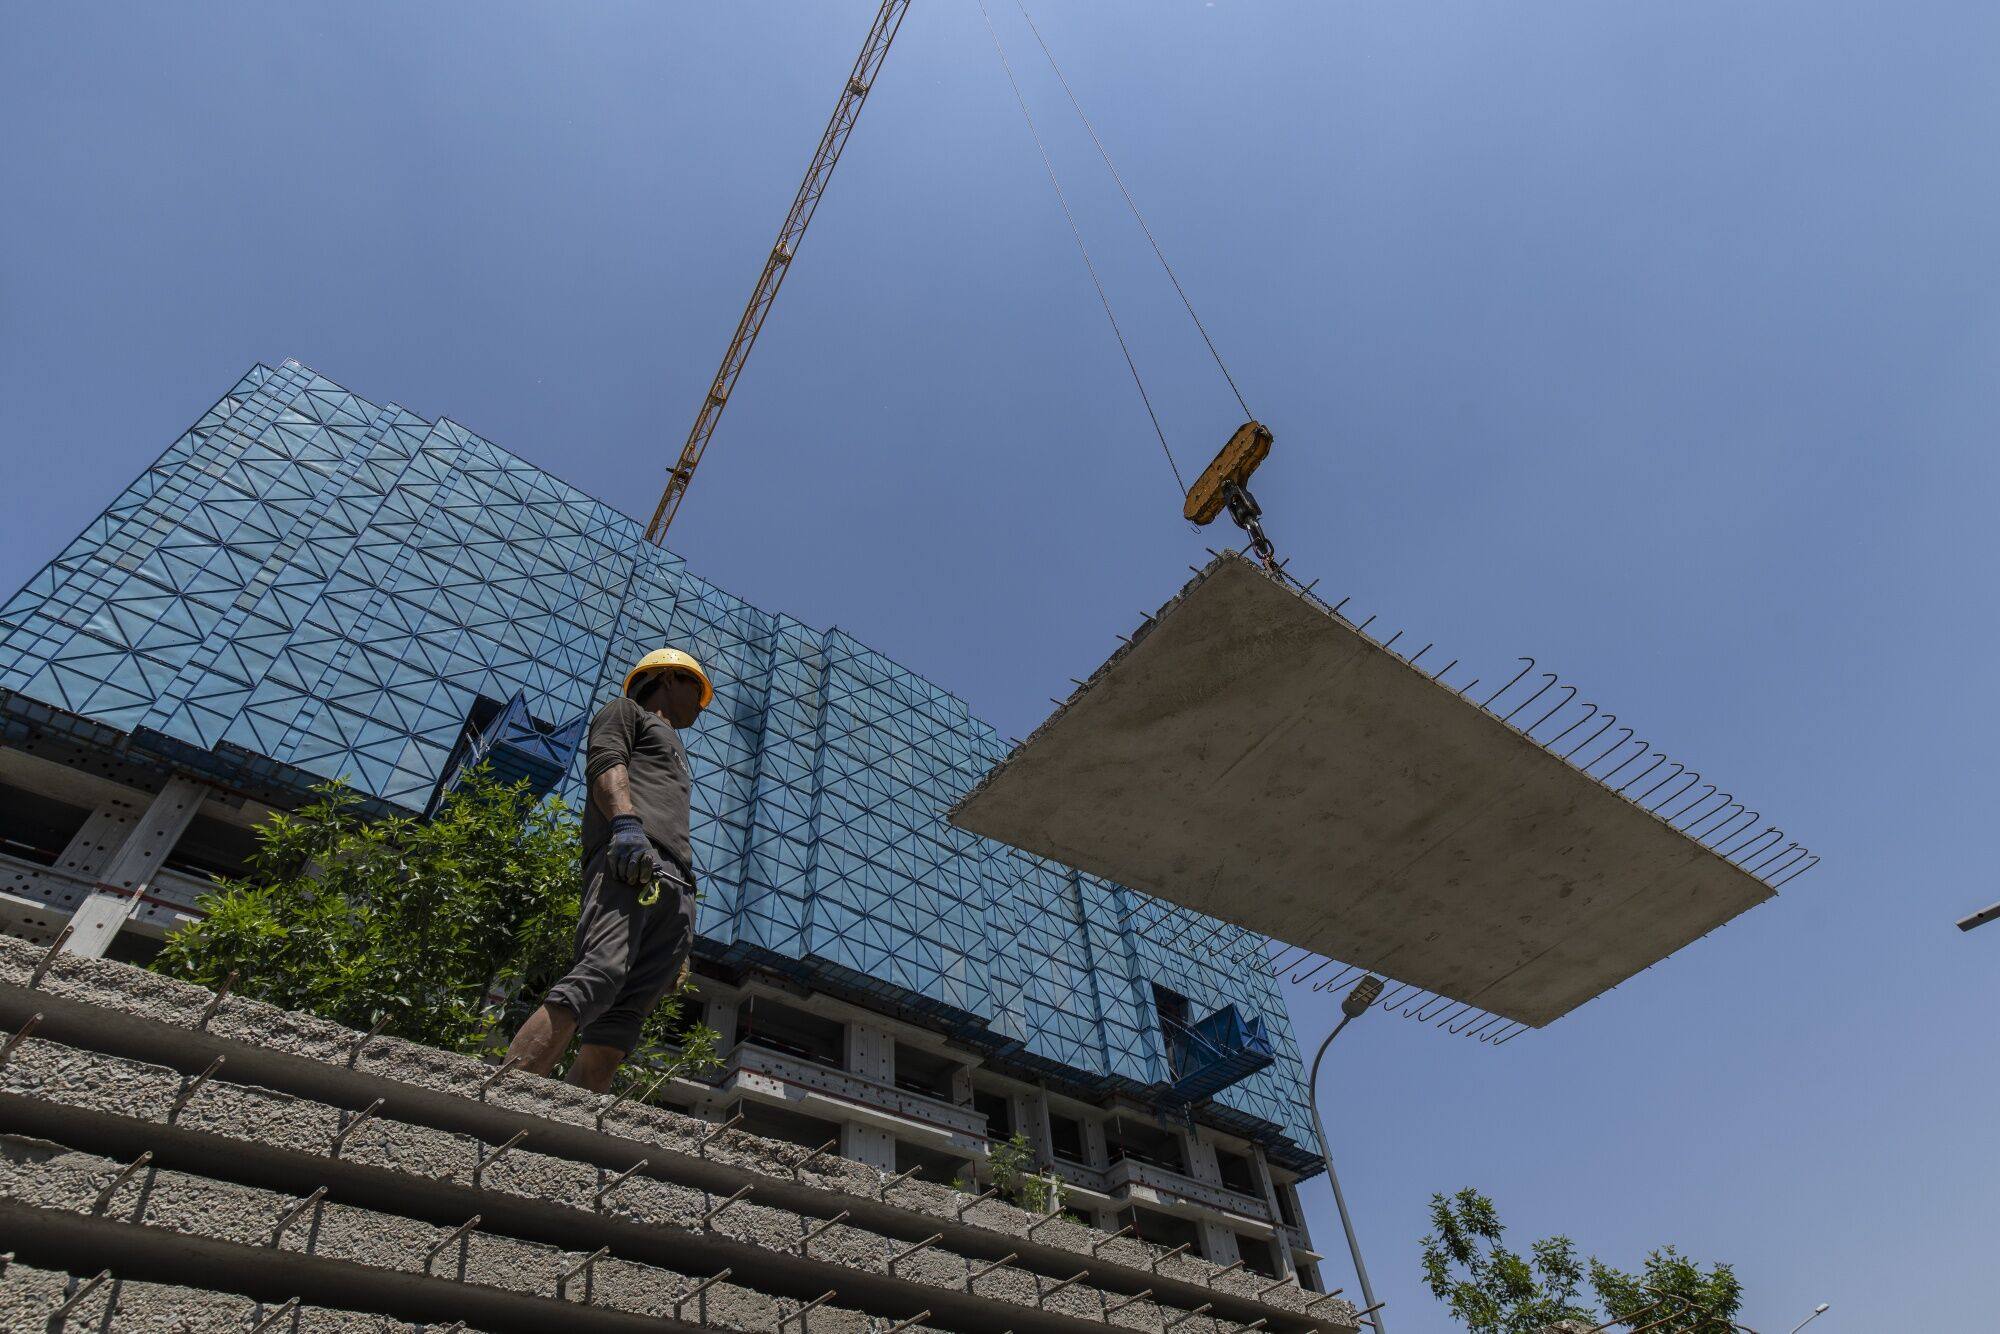 Property investment in China fell by 9.8 per cent in the first four months of the year. Photo: Bloomberg